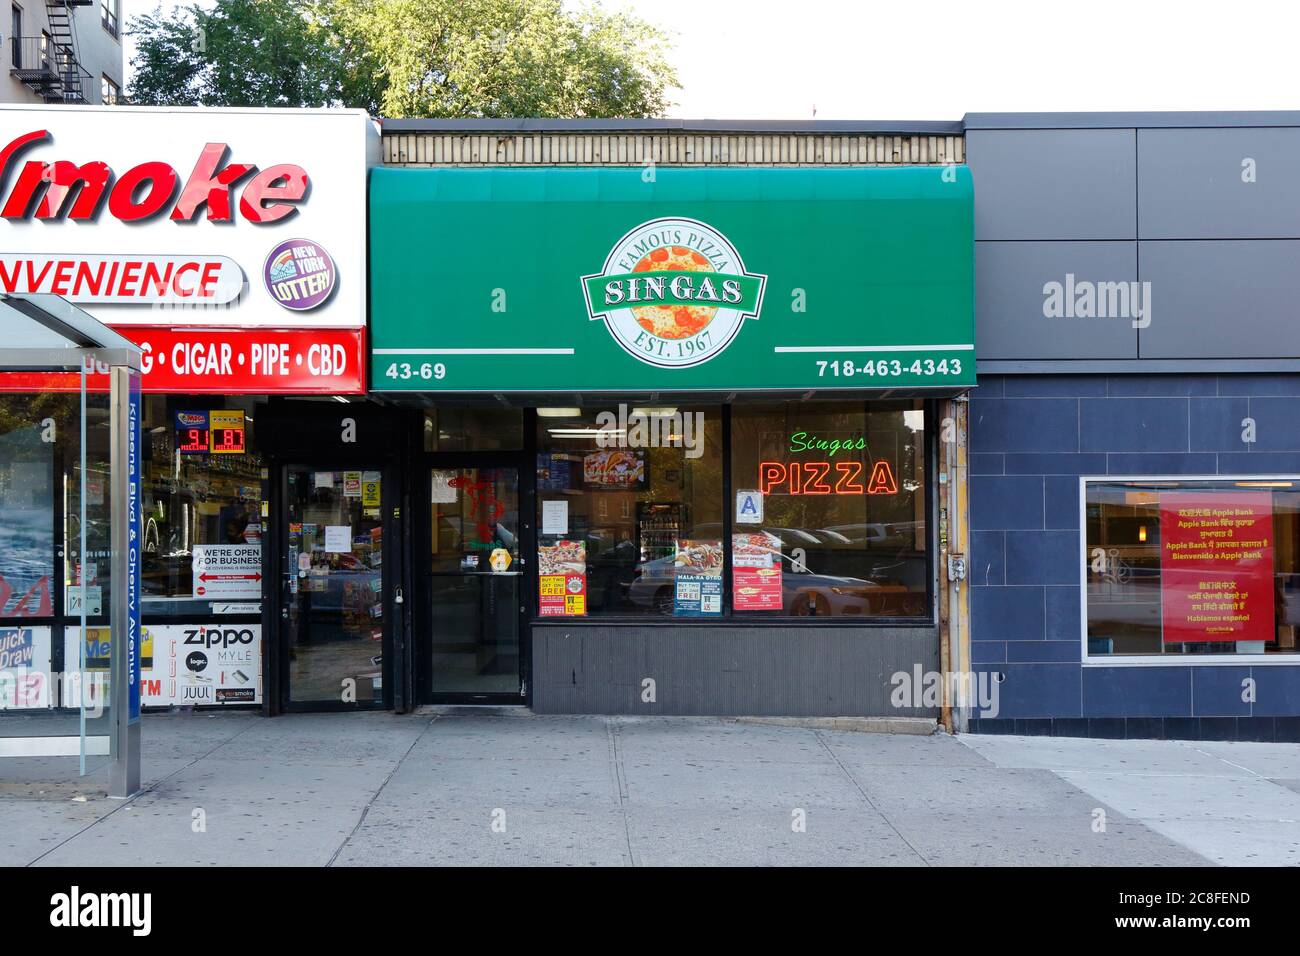 Singas Famous Pizza, 43-69 Kissena Blvd, Queens, New York. NYC storefront photo of a pizza shop in the Flushing neighborhood. Stock Photo